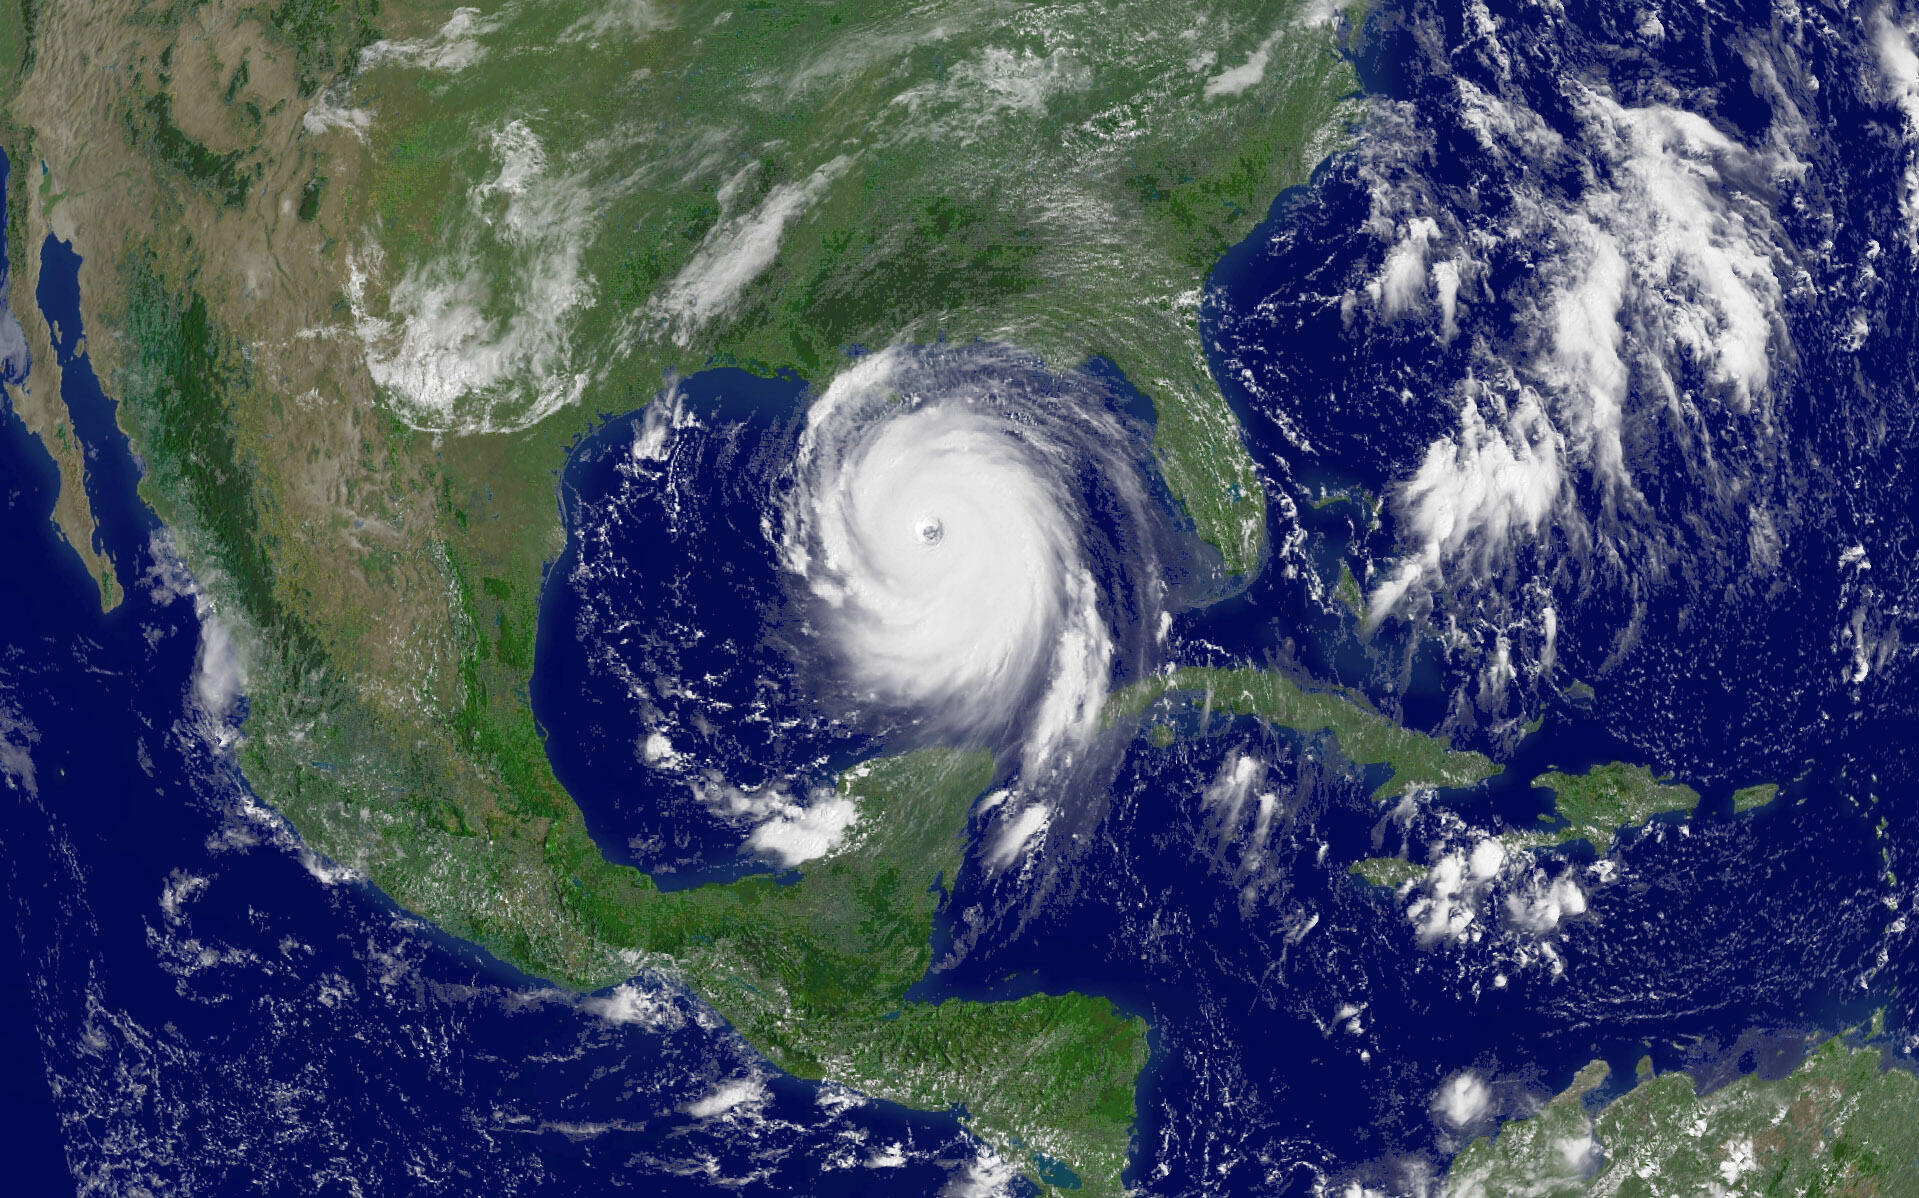 NOAA satellite and map image showing Hurricane Katrina makes landfall along the central U.S. Gulf Coast on August 28, 2005